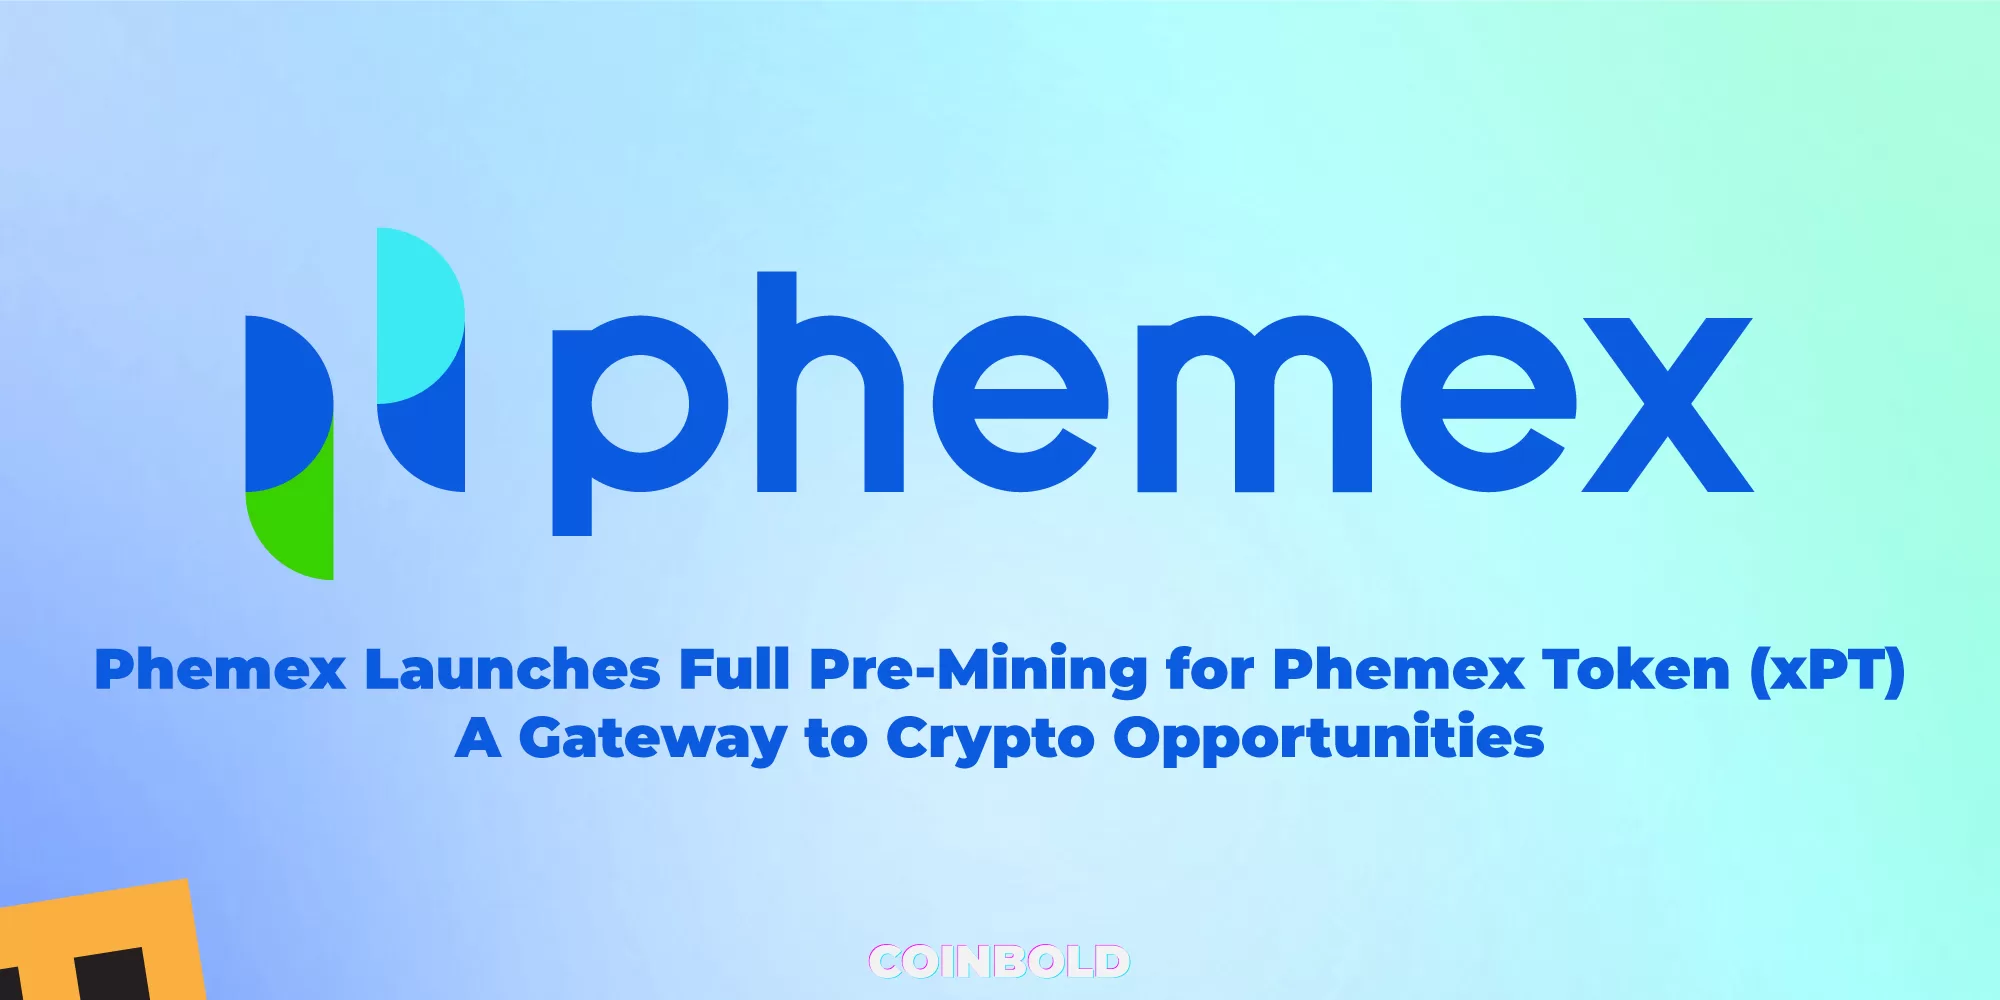 Phemex Launches Full Pre-Mining for Phemex Token (xPT): A Gateway to Crypto Opportunities